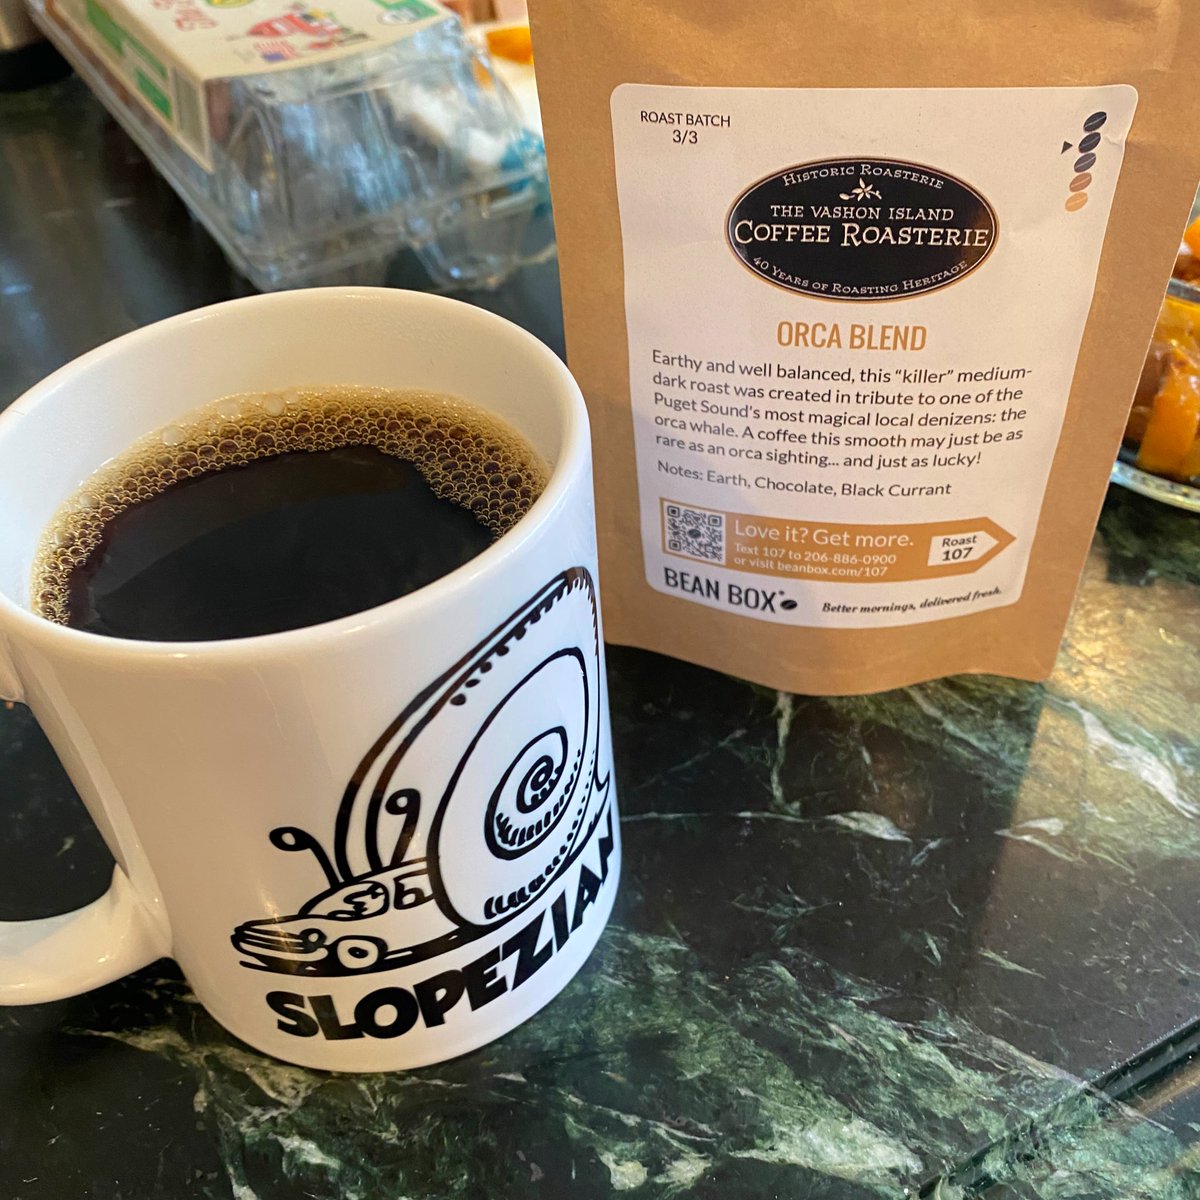 The Vashon Island Coffee Roasterie Orca BlendI could use so many puns here but I’ll keep it simple: this is a killer coffee. Dark and roasty and criminally smooth. What a delight!